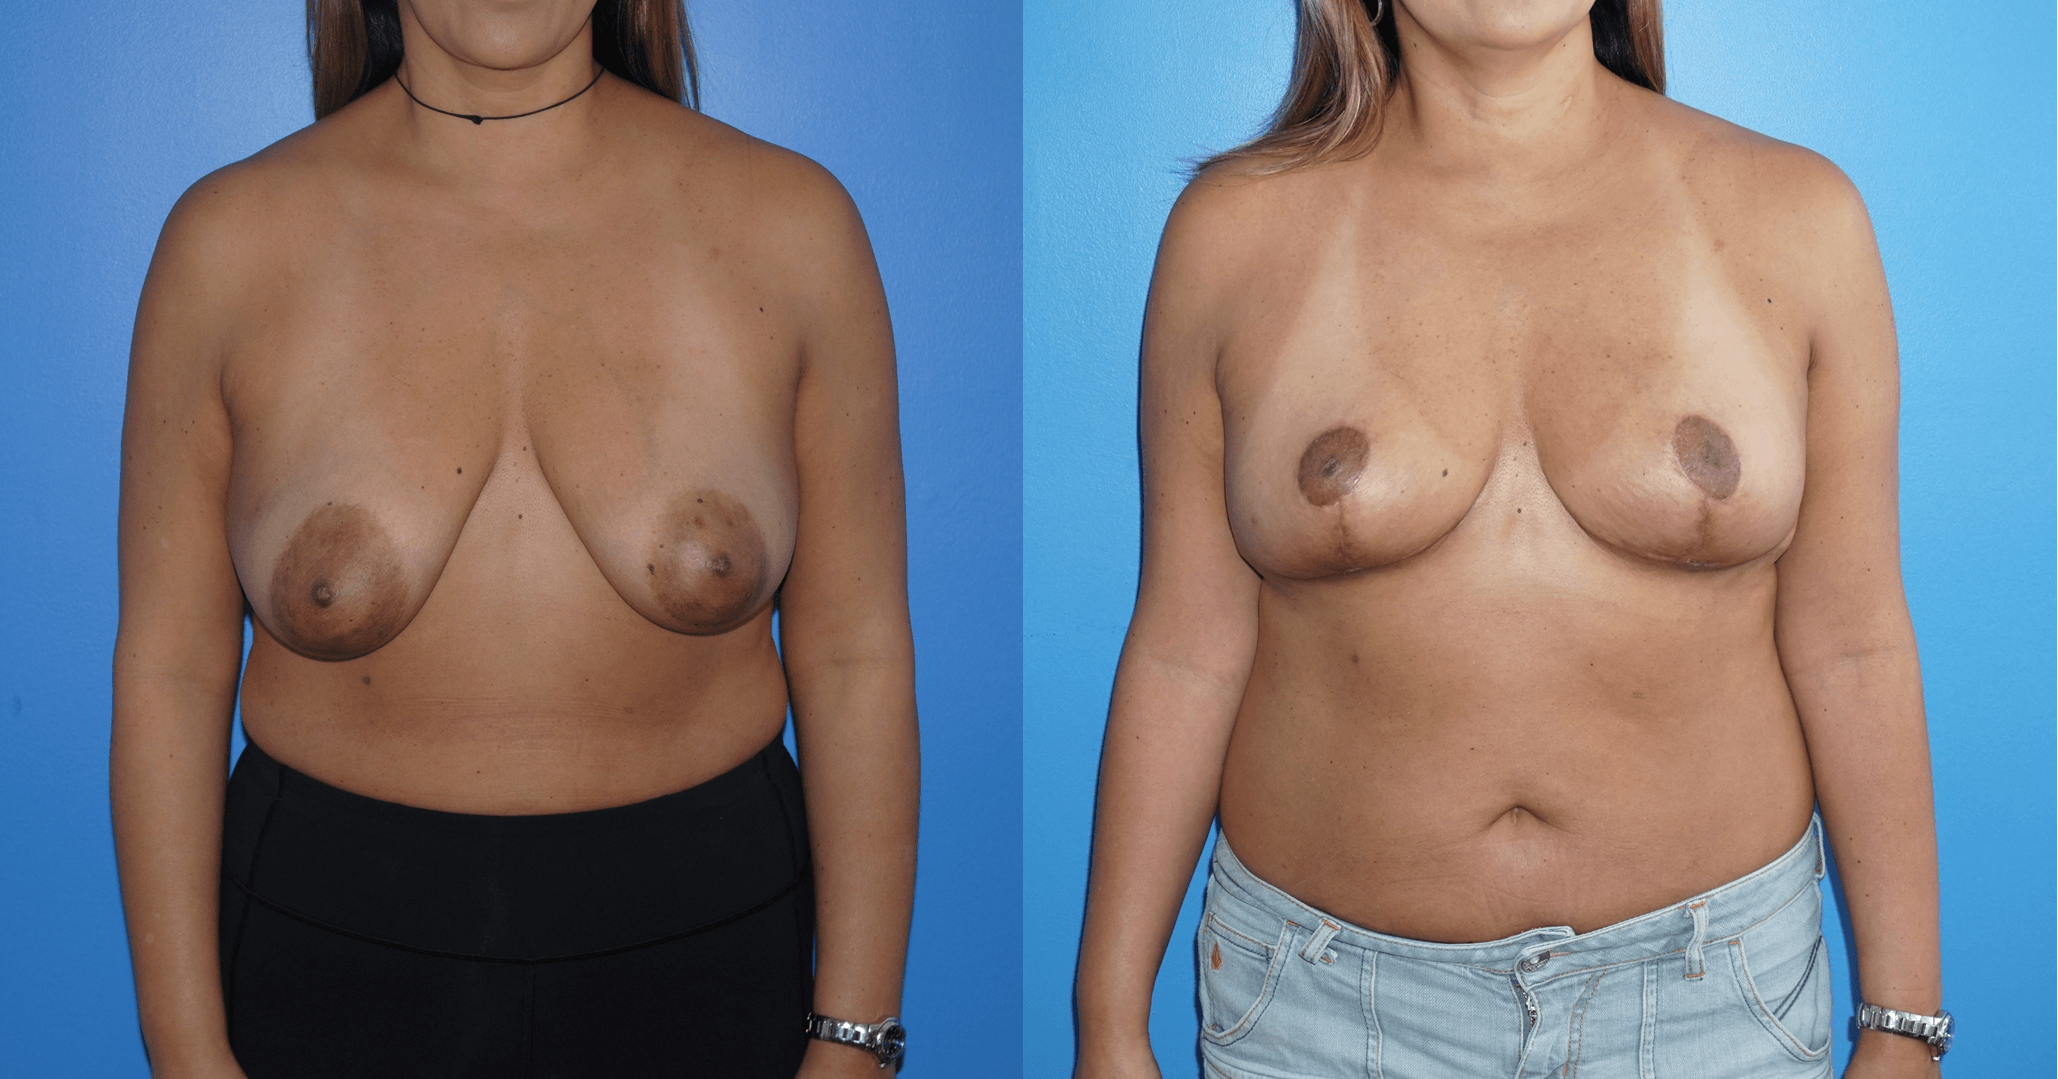 Closure of Lumpectomy Defect with Oncoplastic Techniques